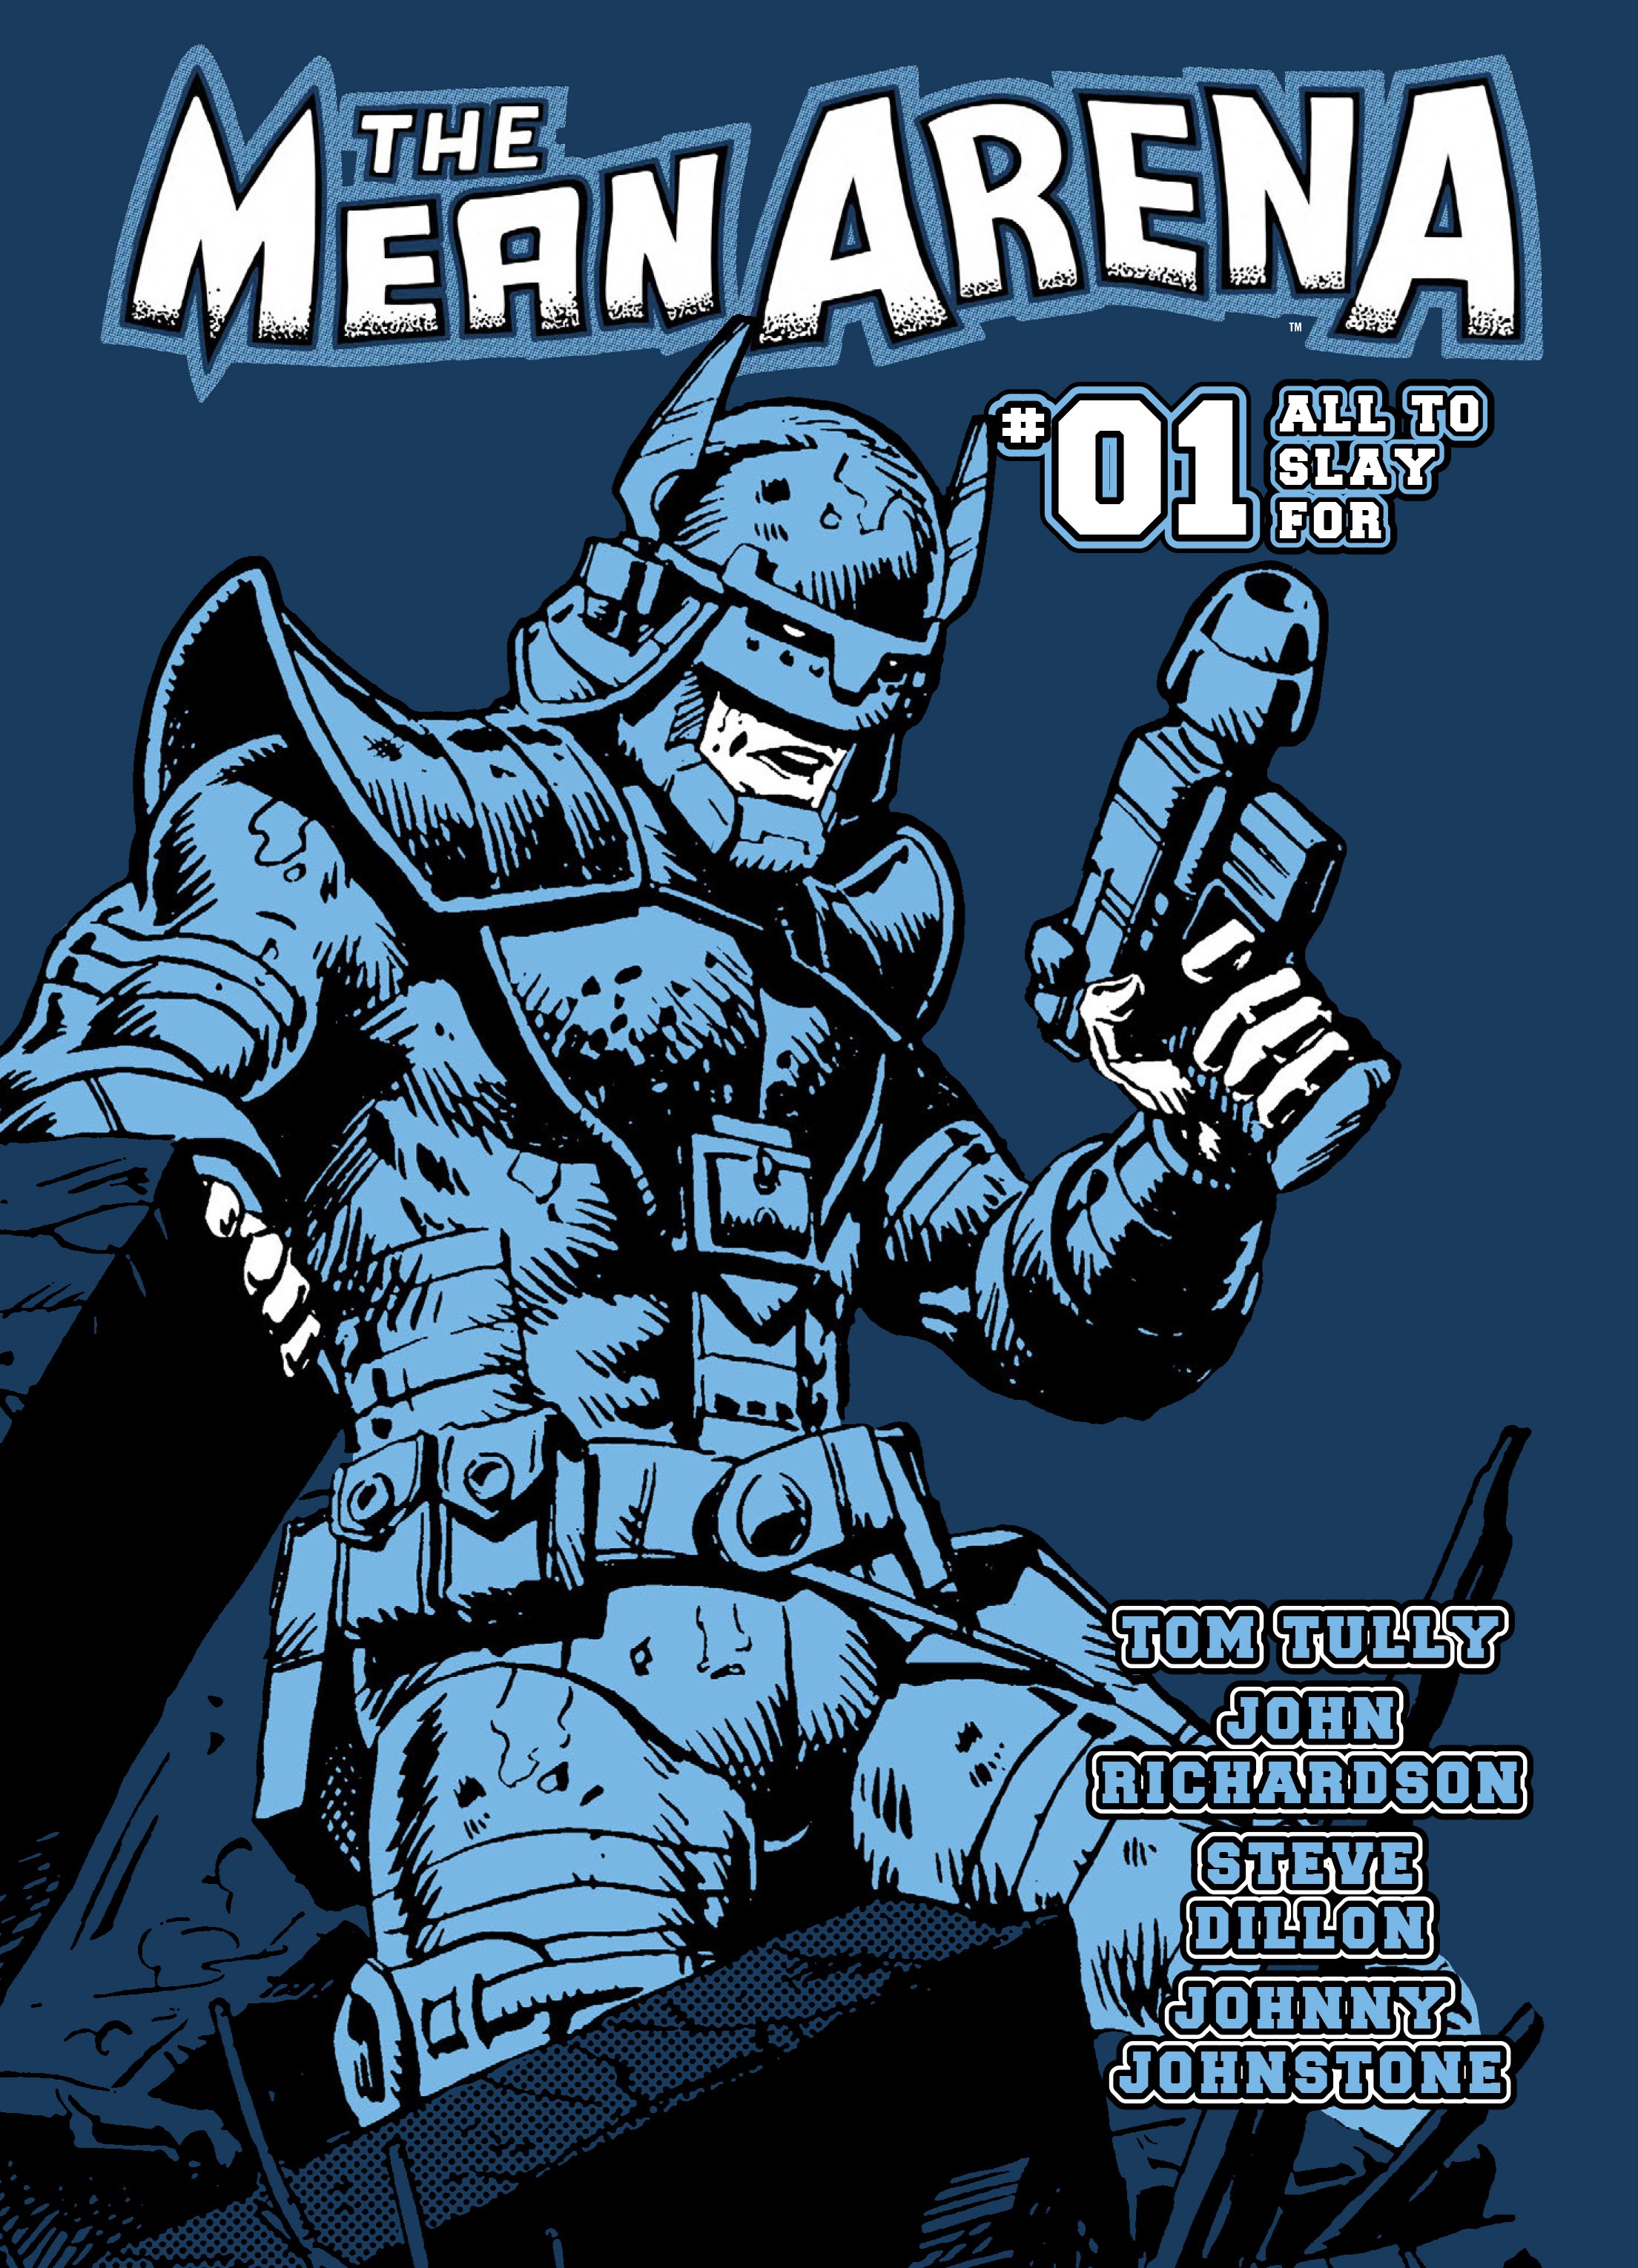 Read online The Mean Arena comic -  Issue # TPB - 3